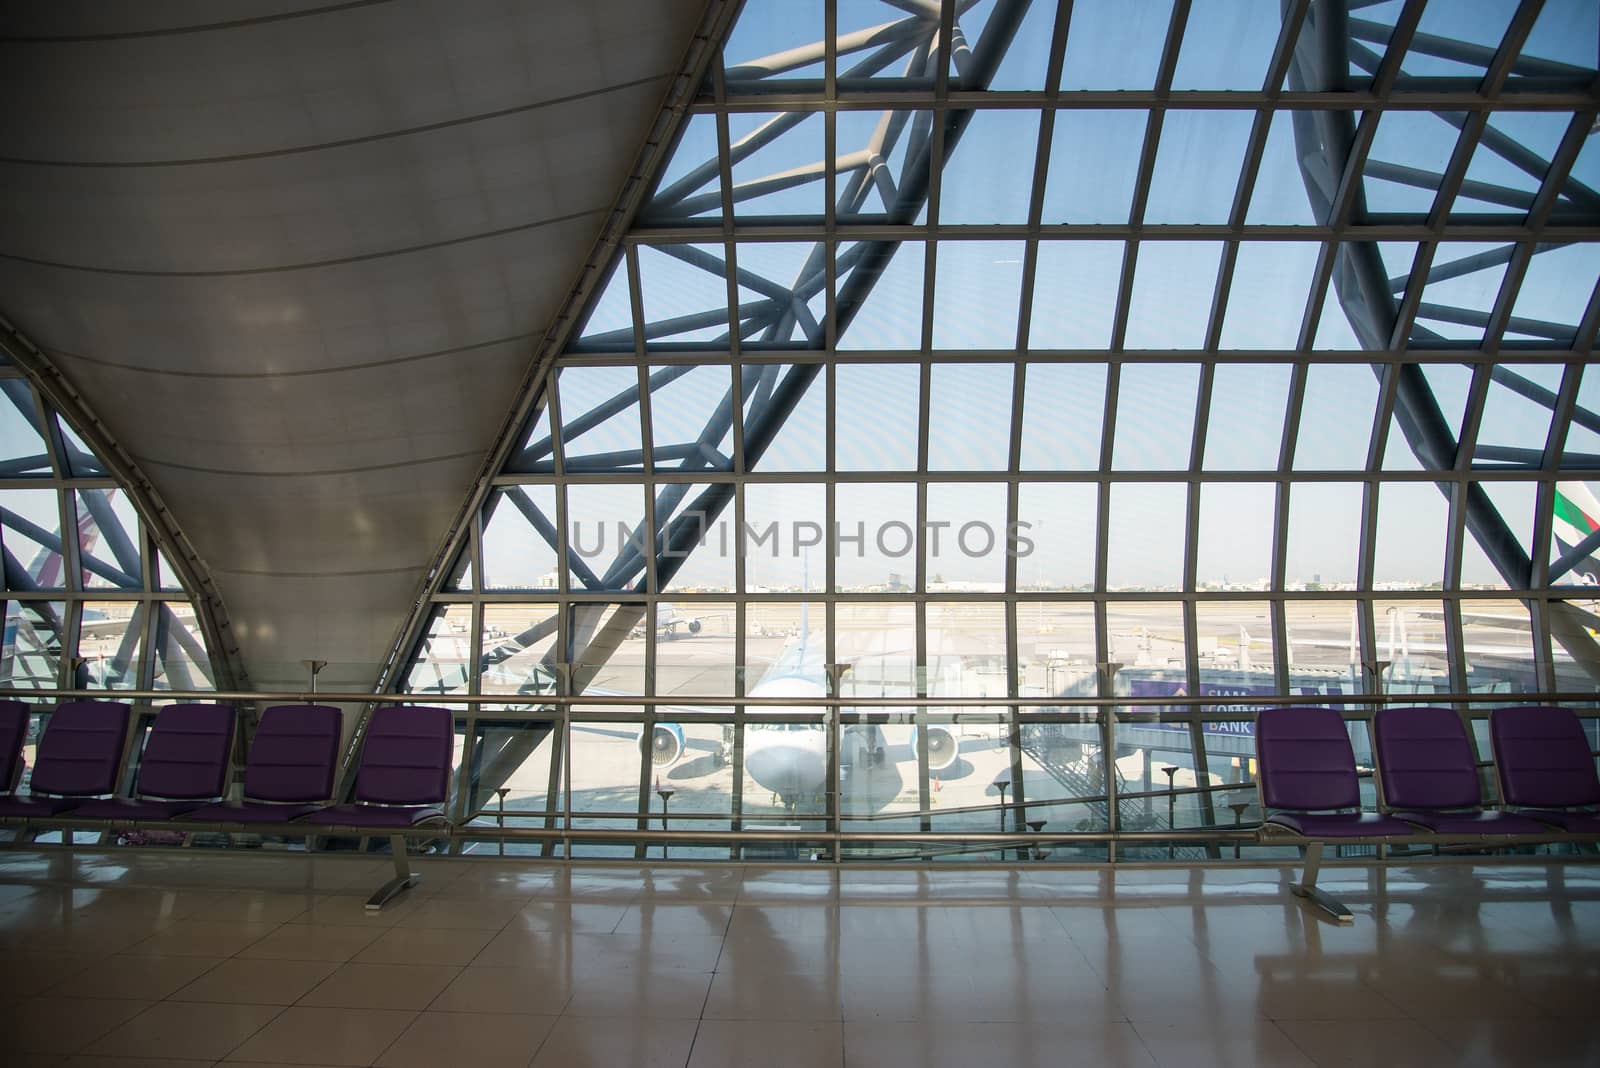 Suvarnabhumi Airport (BKK) is the main hub for Thai Airways (TG) and the largest airport serving Bangkok, the capital of Thailand.